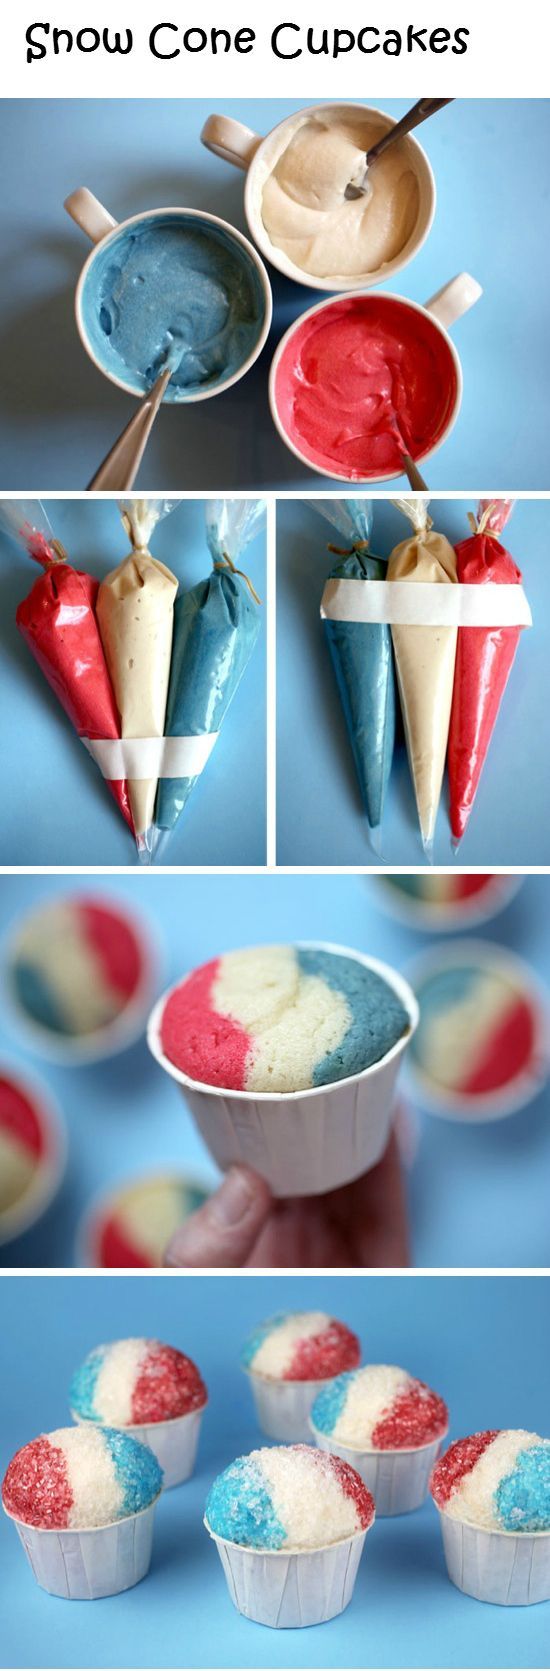 Snow Cone cupcakes 20 Cupcake Ideas That Will Keep You Nom Nomming look more like bomb pops than snow cone